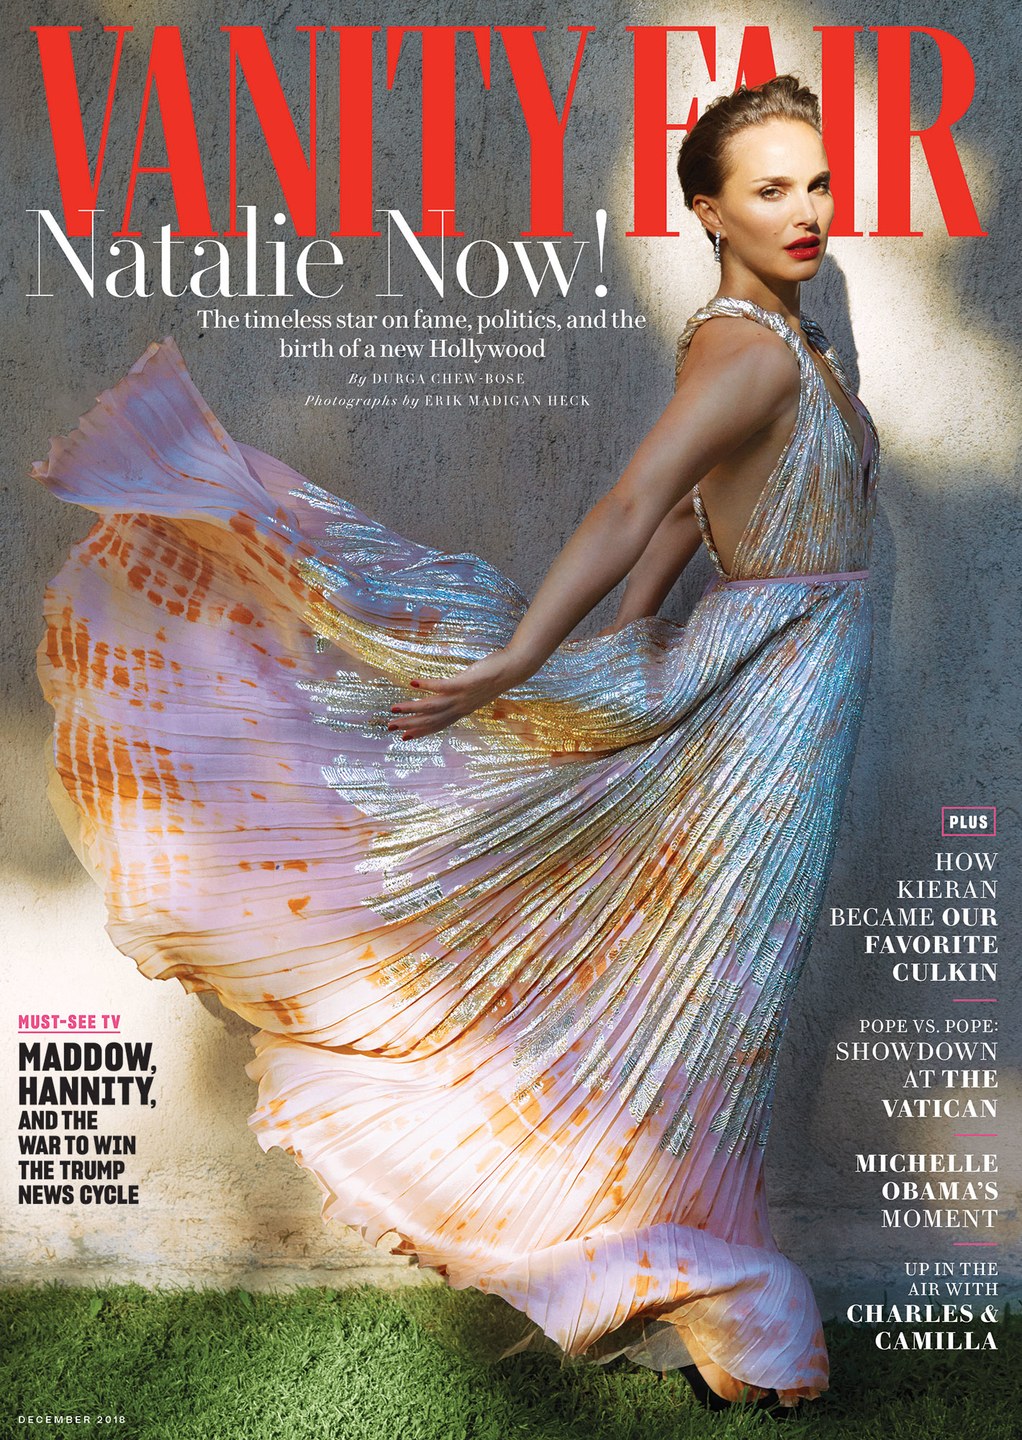 You are currently viewing Natalie Portman in Vanity Fair